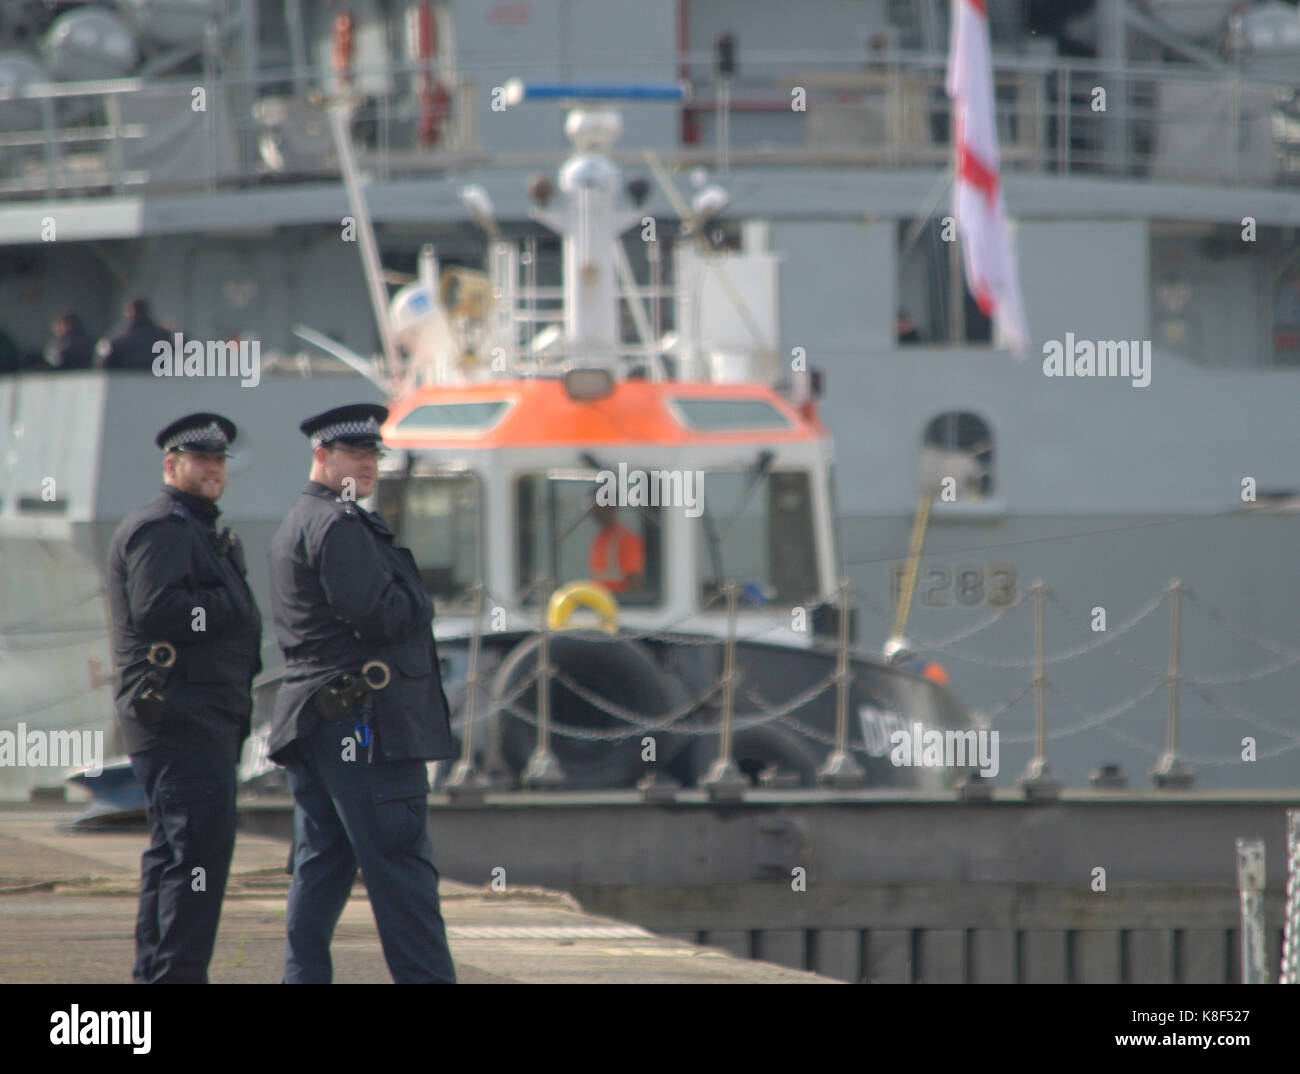 Met Police providing security to warships heading to the DSEi event in London UK Stock Photo